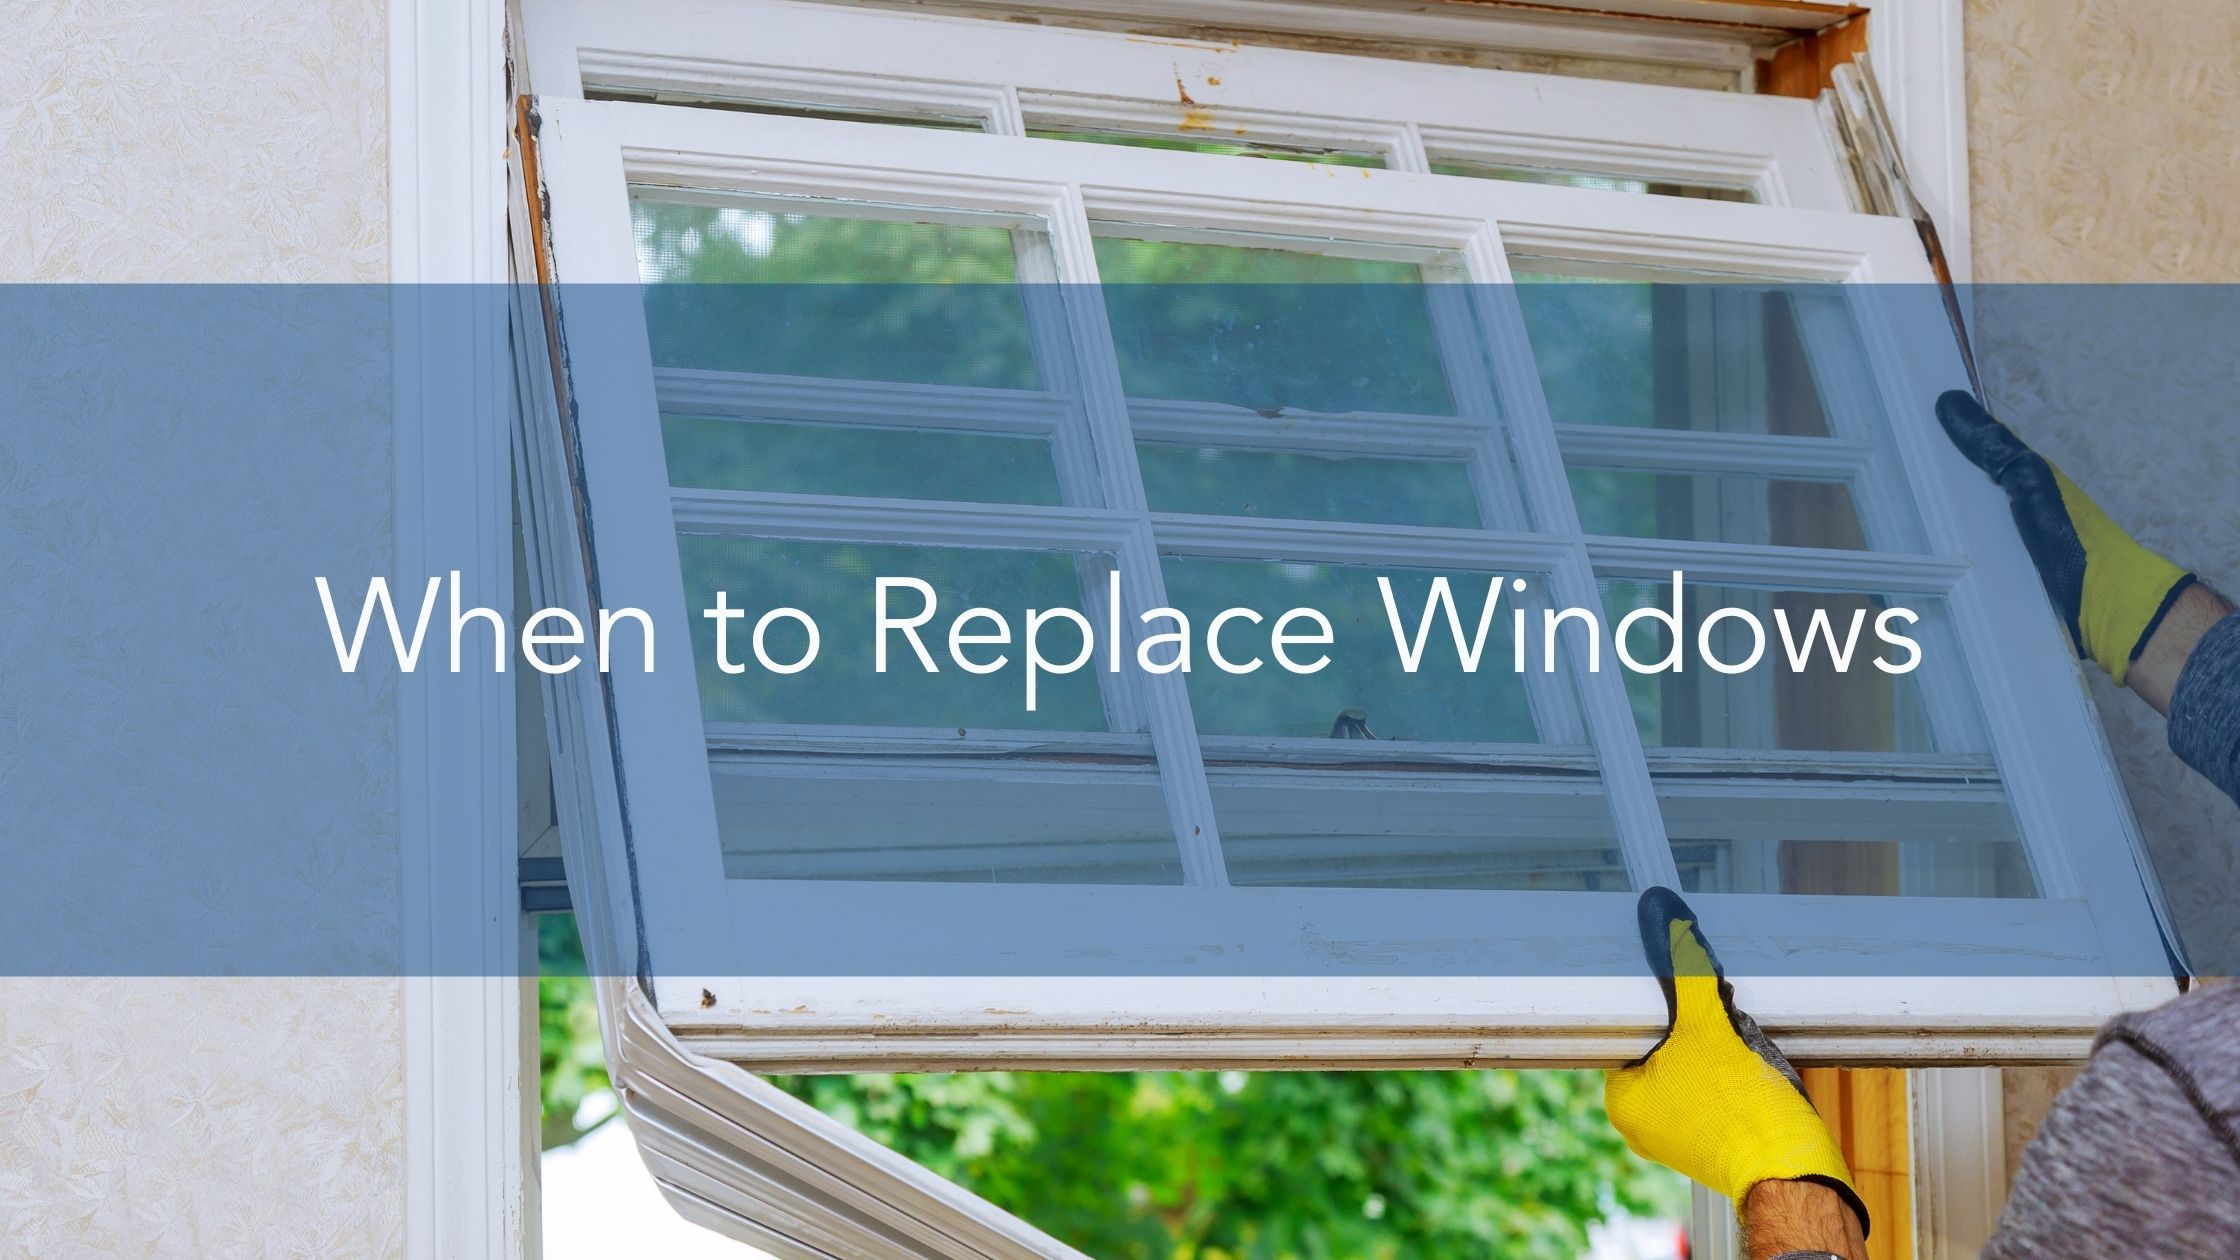 https://handymanconnection.com/wp-content/uploads/2022/03/When-to-Replace-Windows.jpg